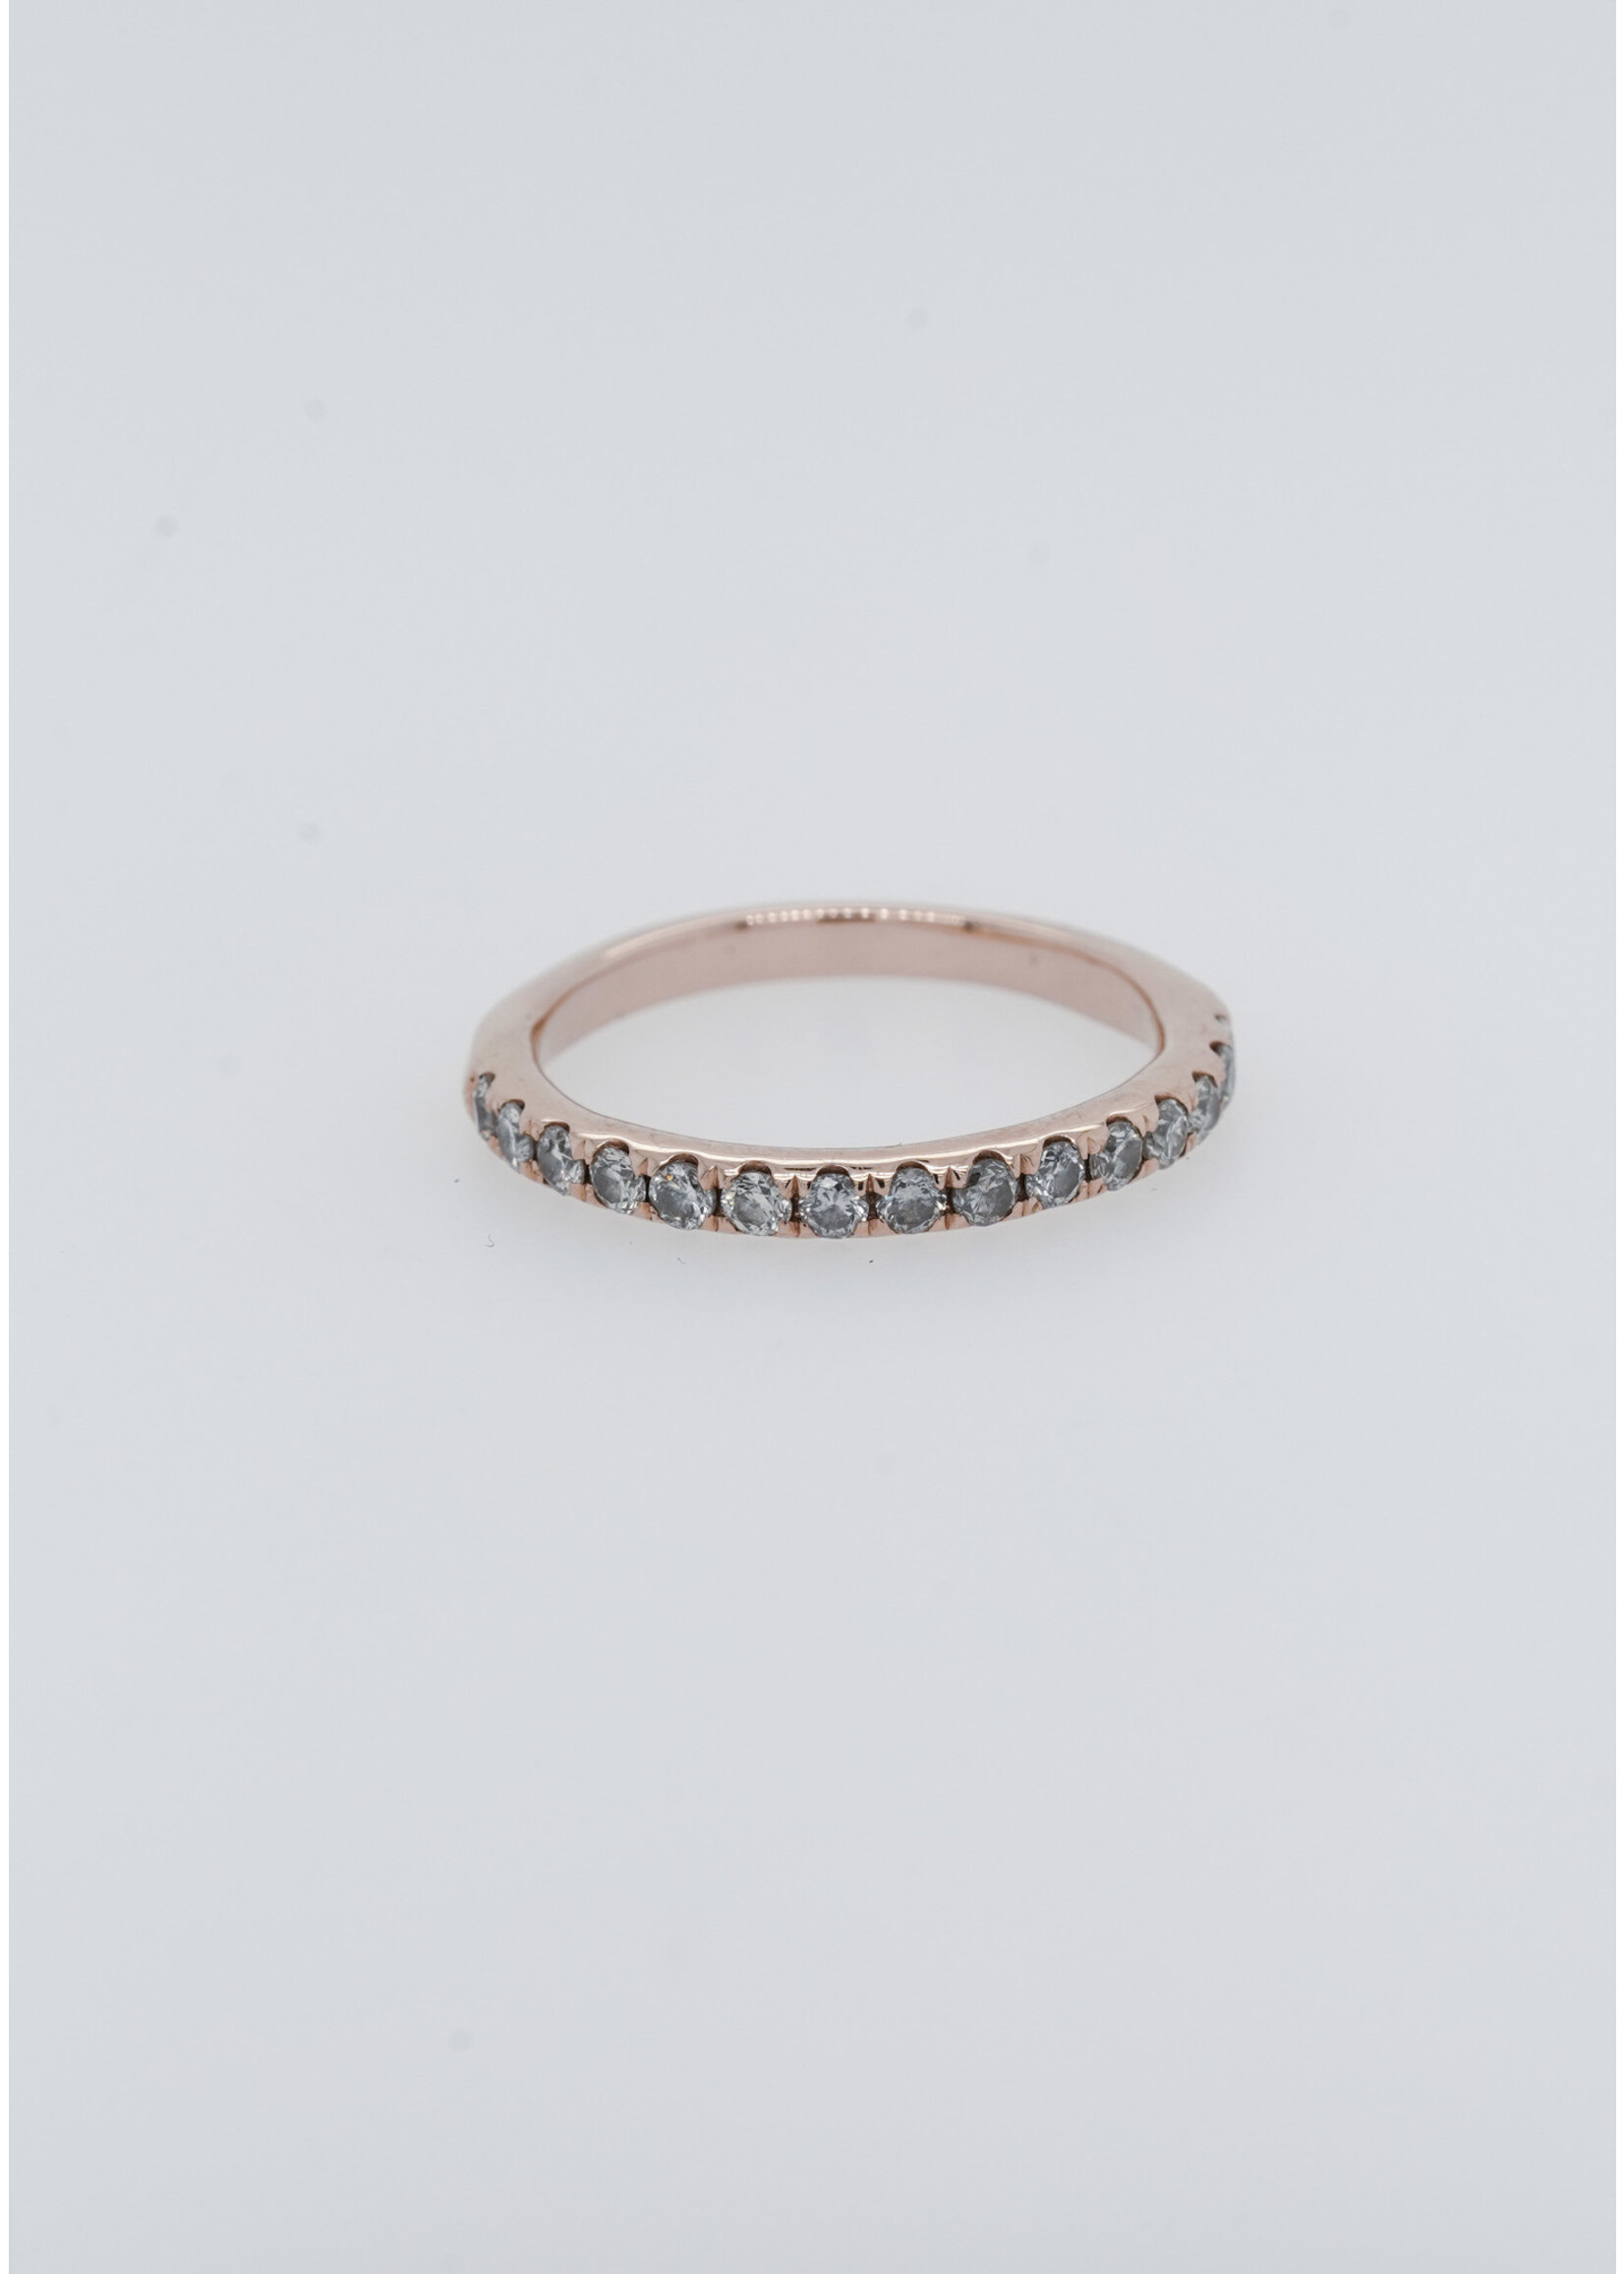 14KR 1.94g .40ctw Diamond Shared Prong Stackable Band (size 6)